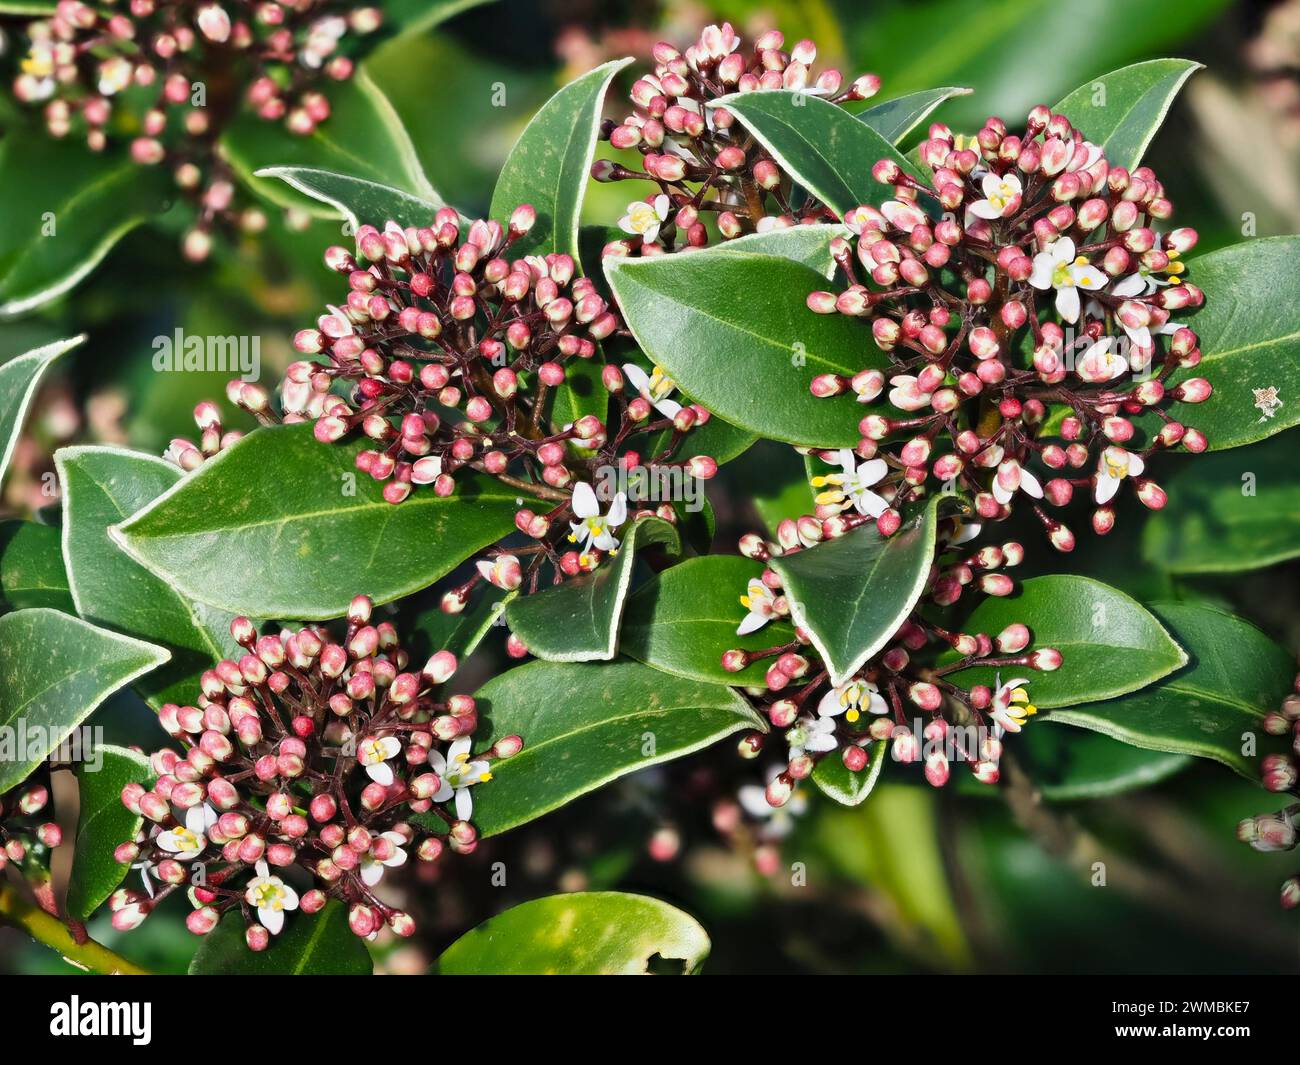 Early spring male flowers of the ornamental evergreen shrub, Skimmia japonica Stock Photo